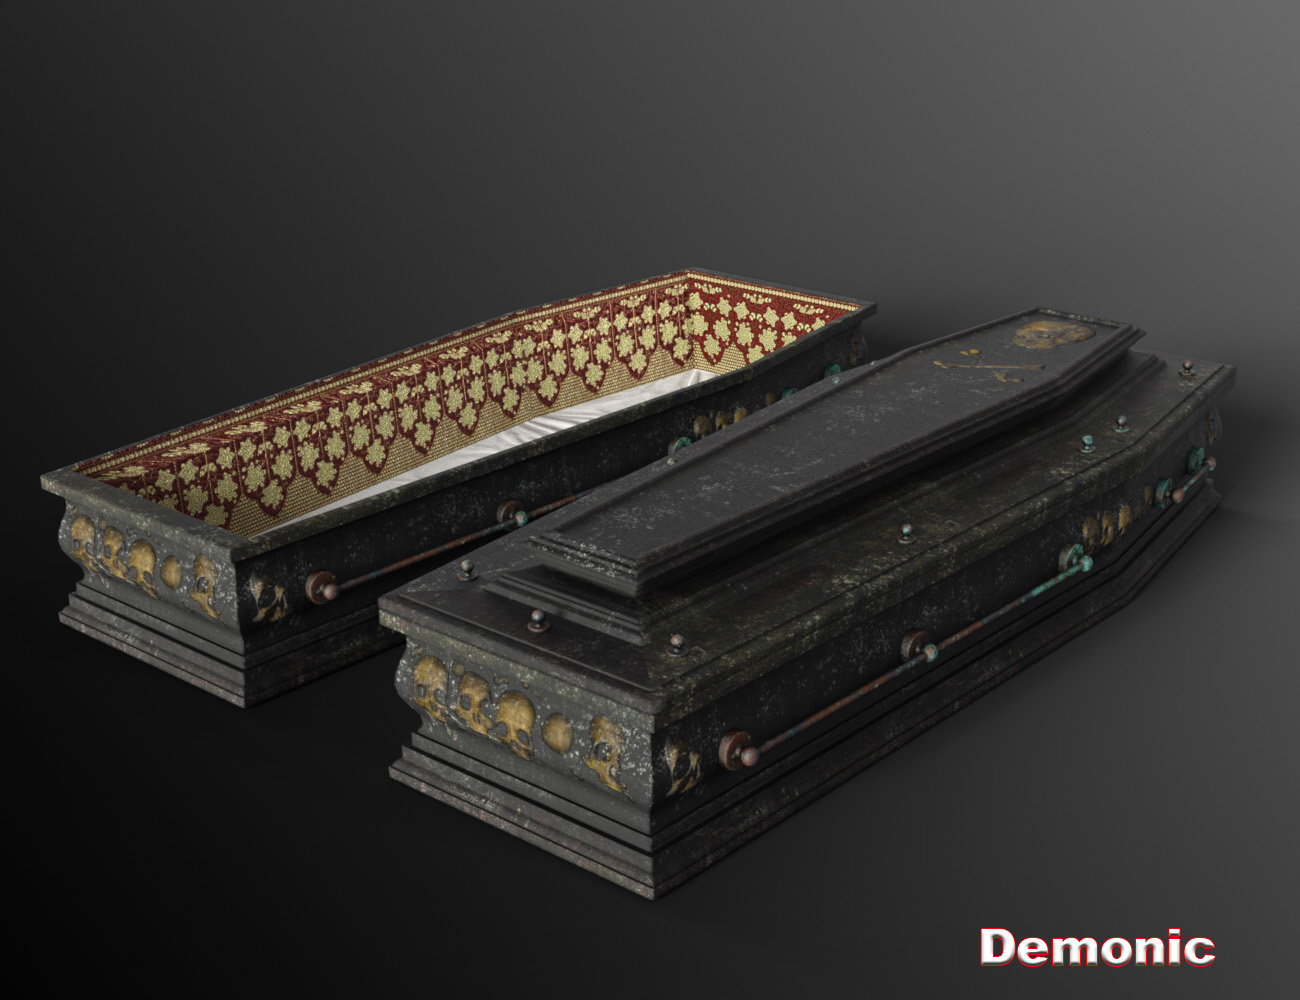 The Hearse Iray Textures Addon by: 3djoji, 3D Models by Daz 3D